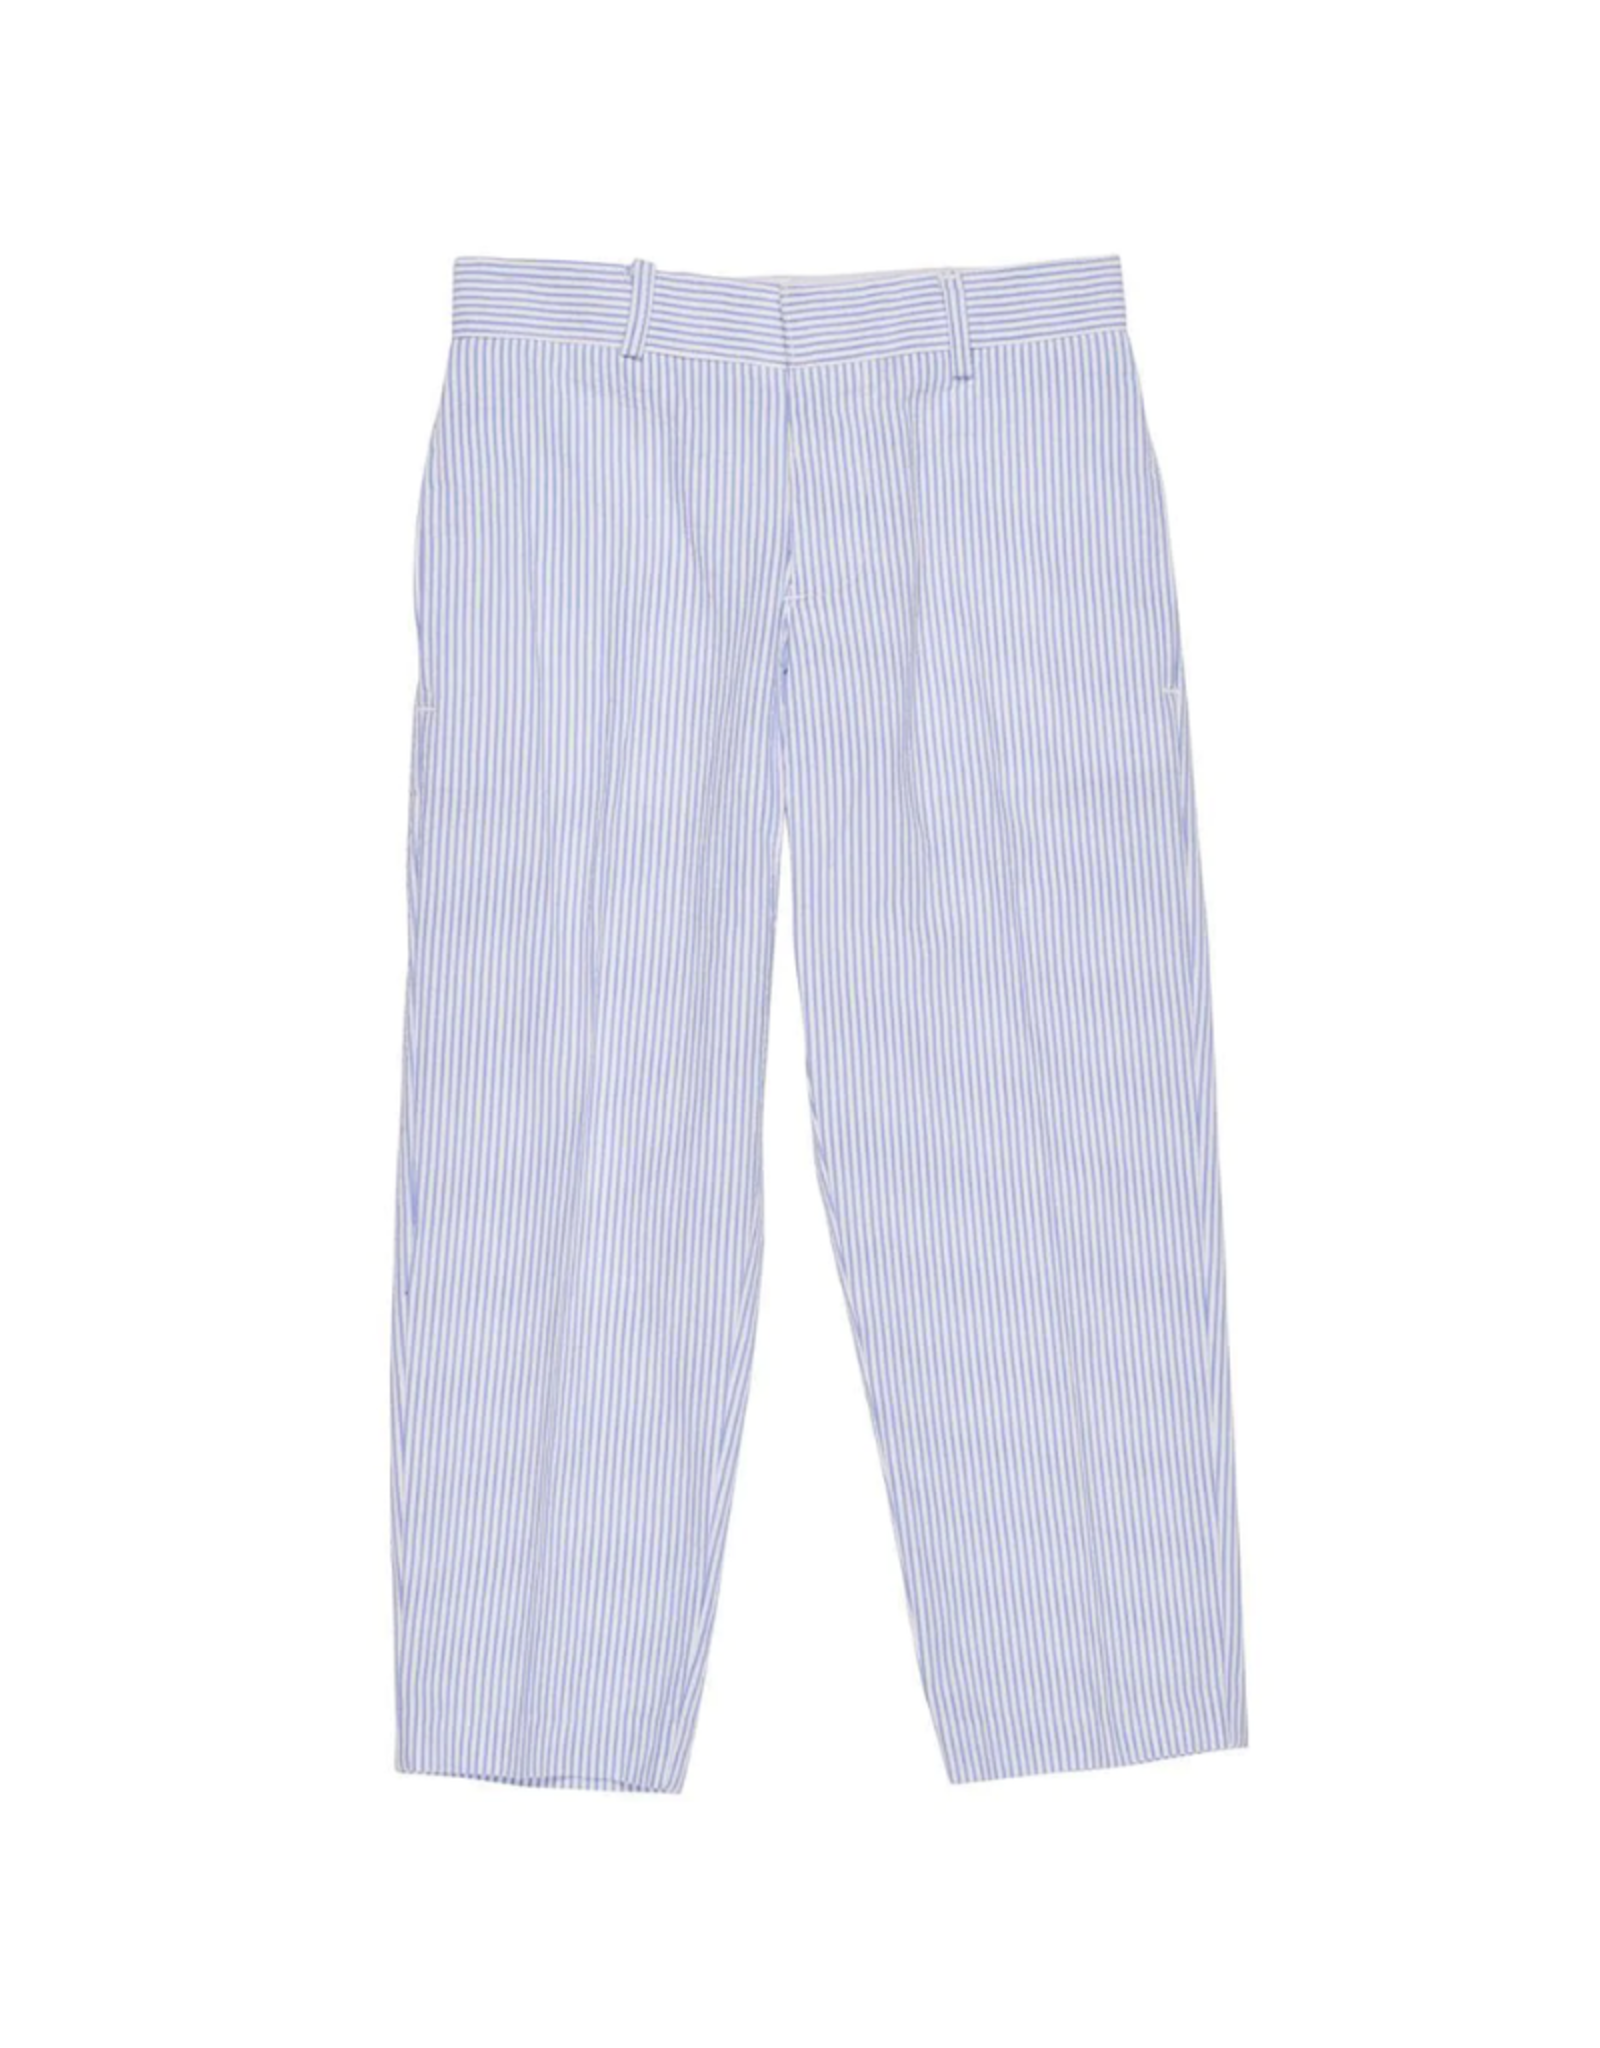 Florence Eiseman Blue and White Striped Seersucker Pants